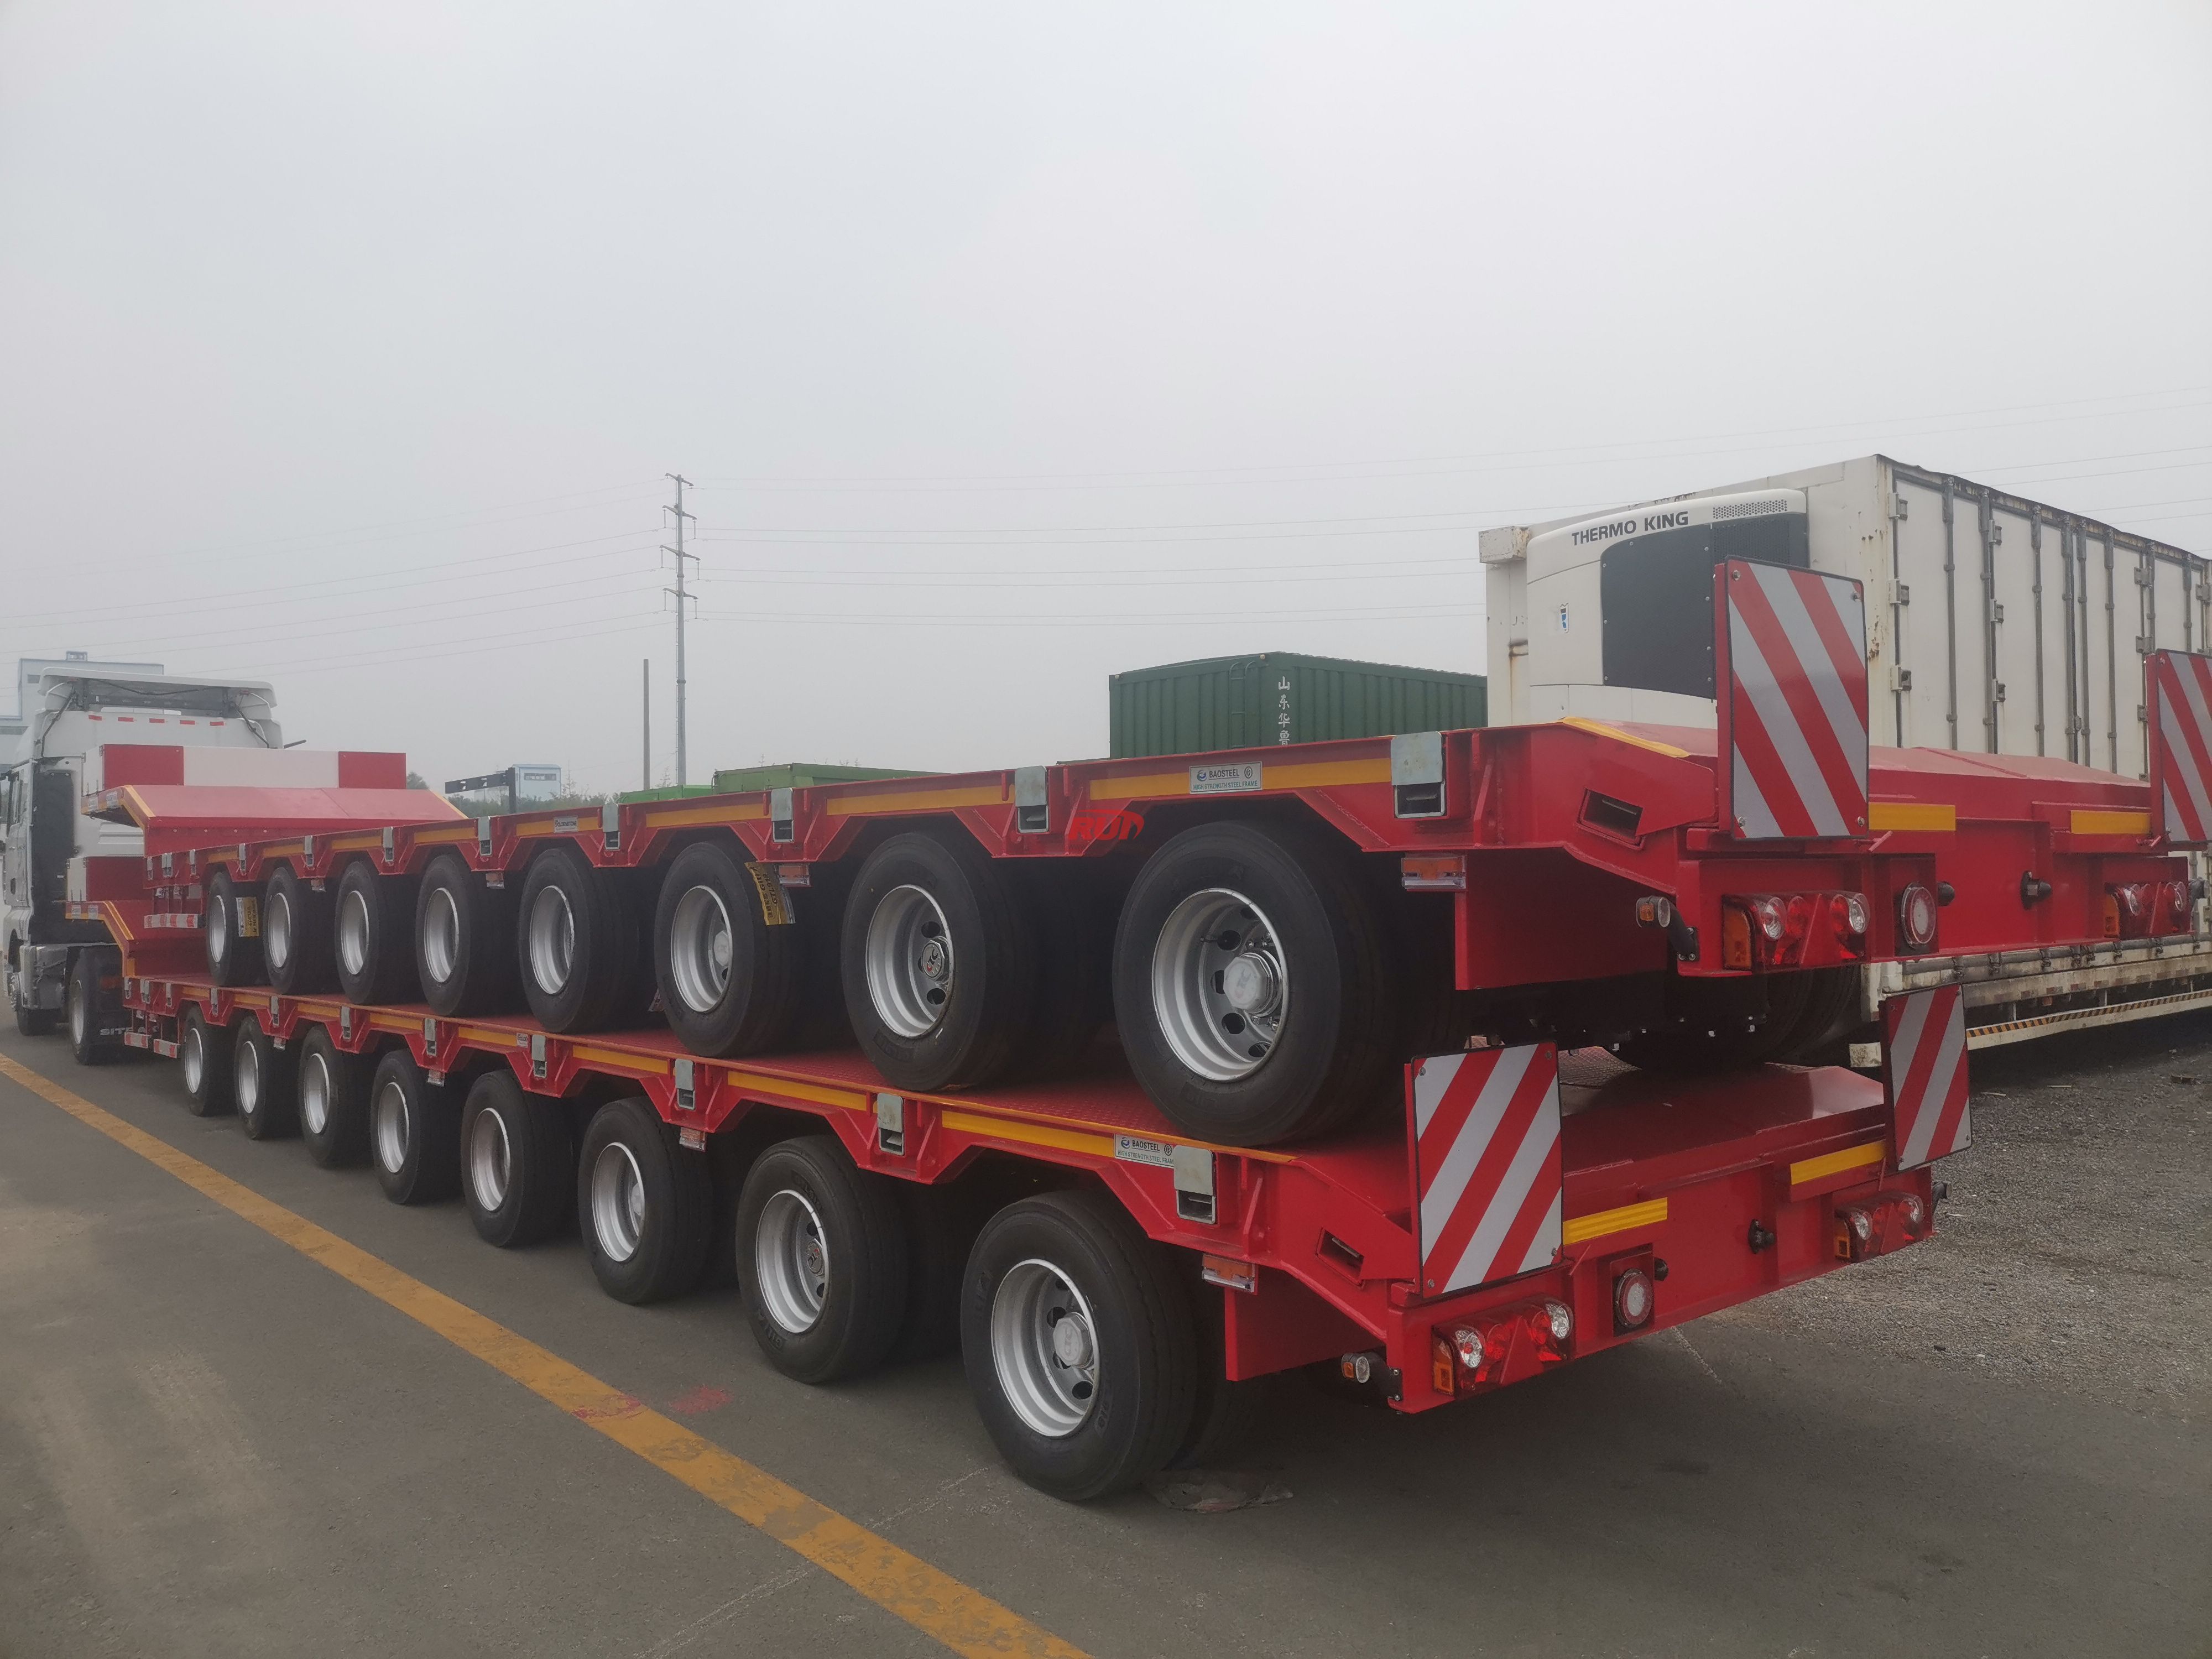  two units multi axle hydraulic trailer ready for delivery